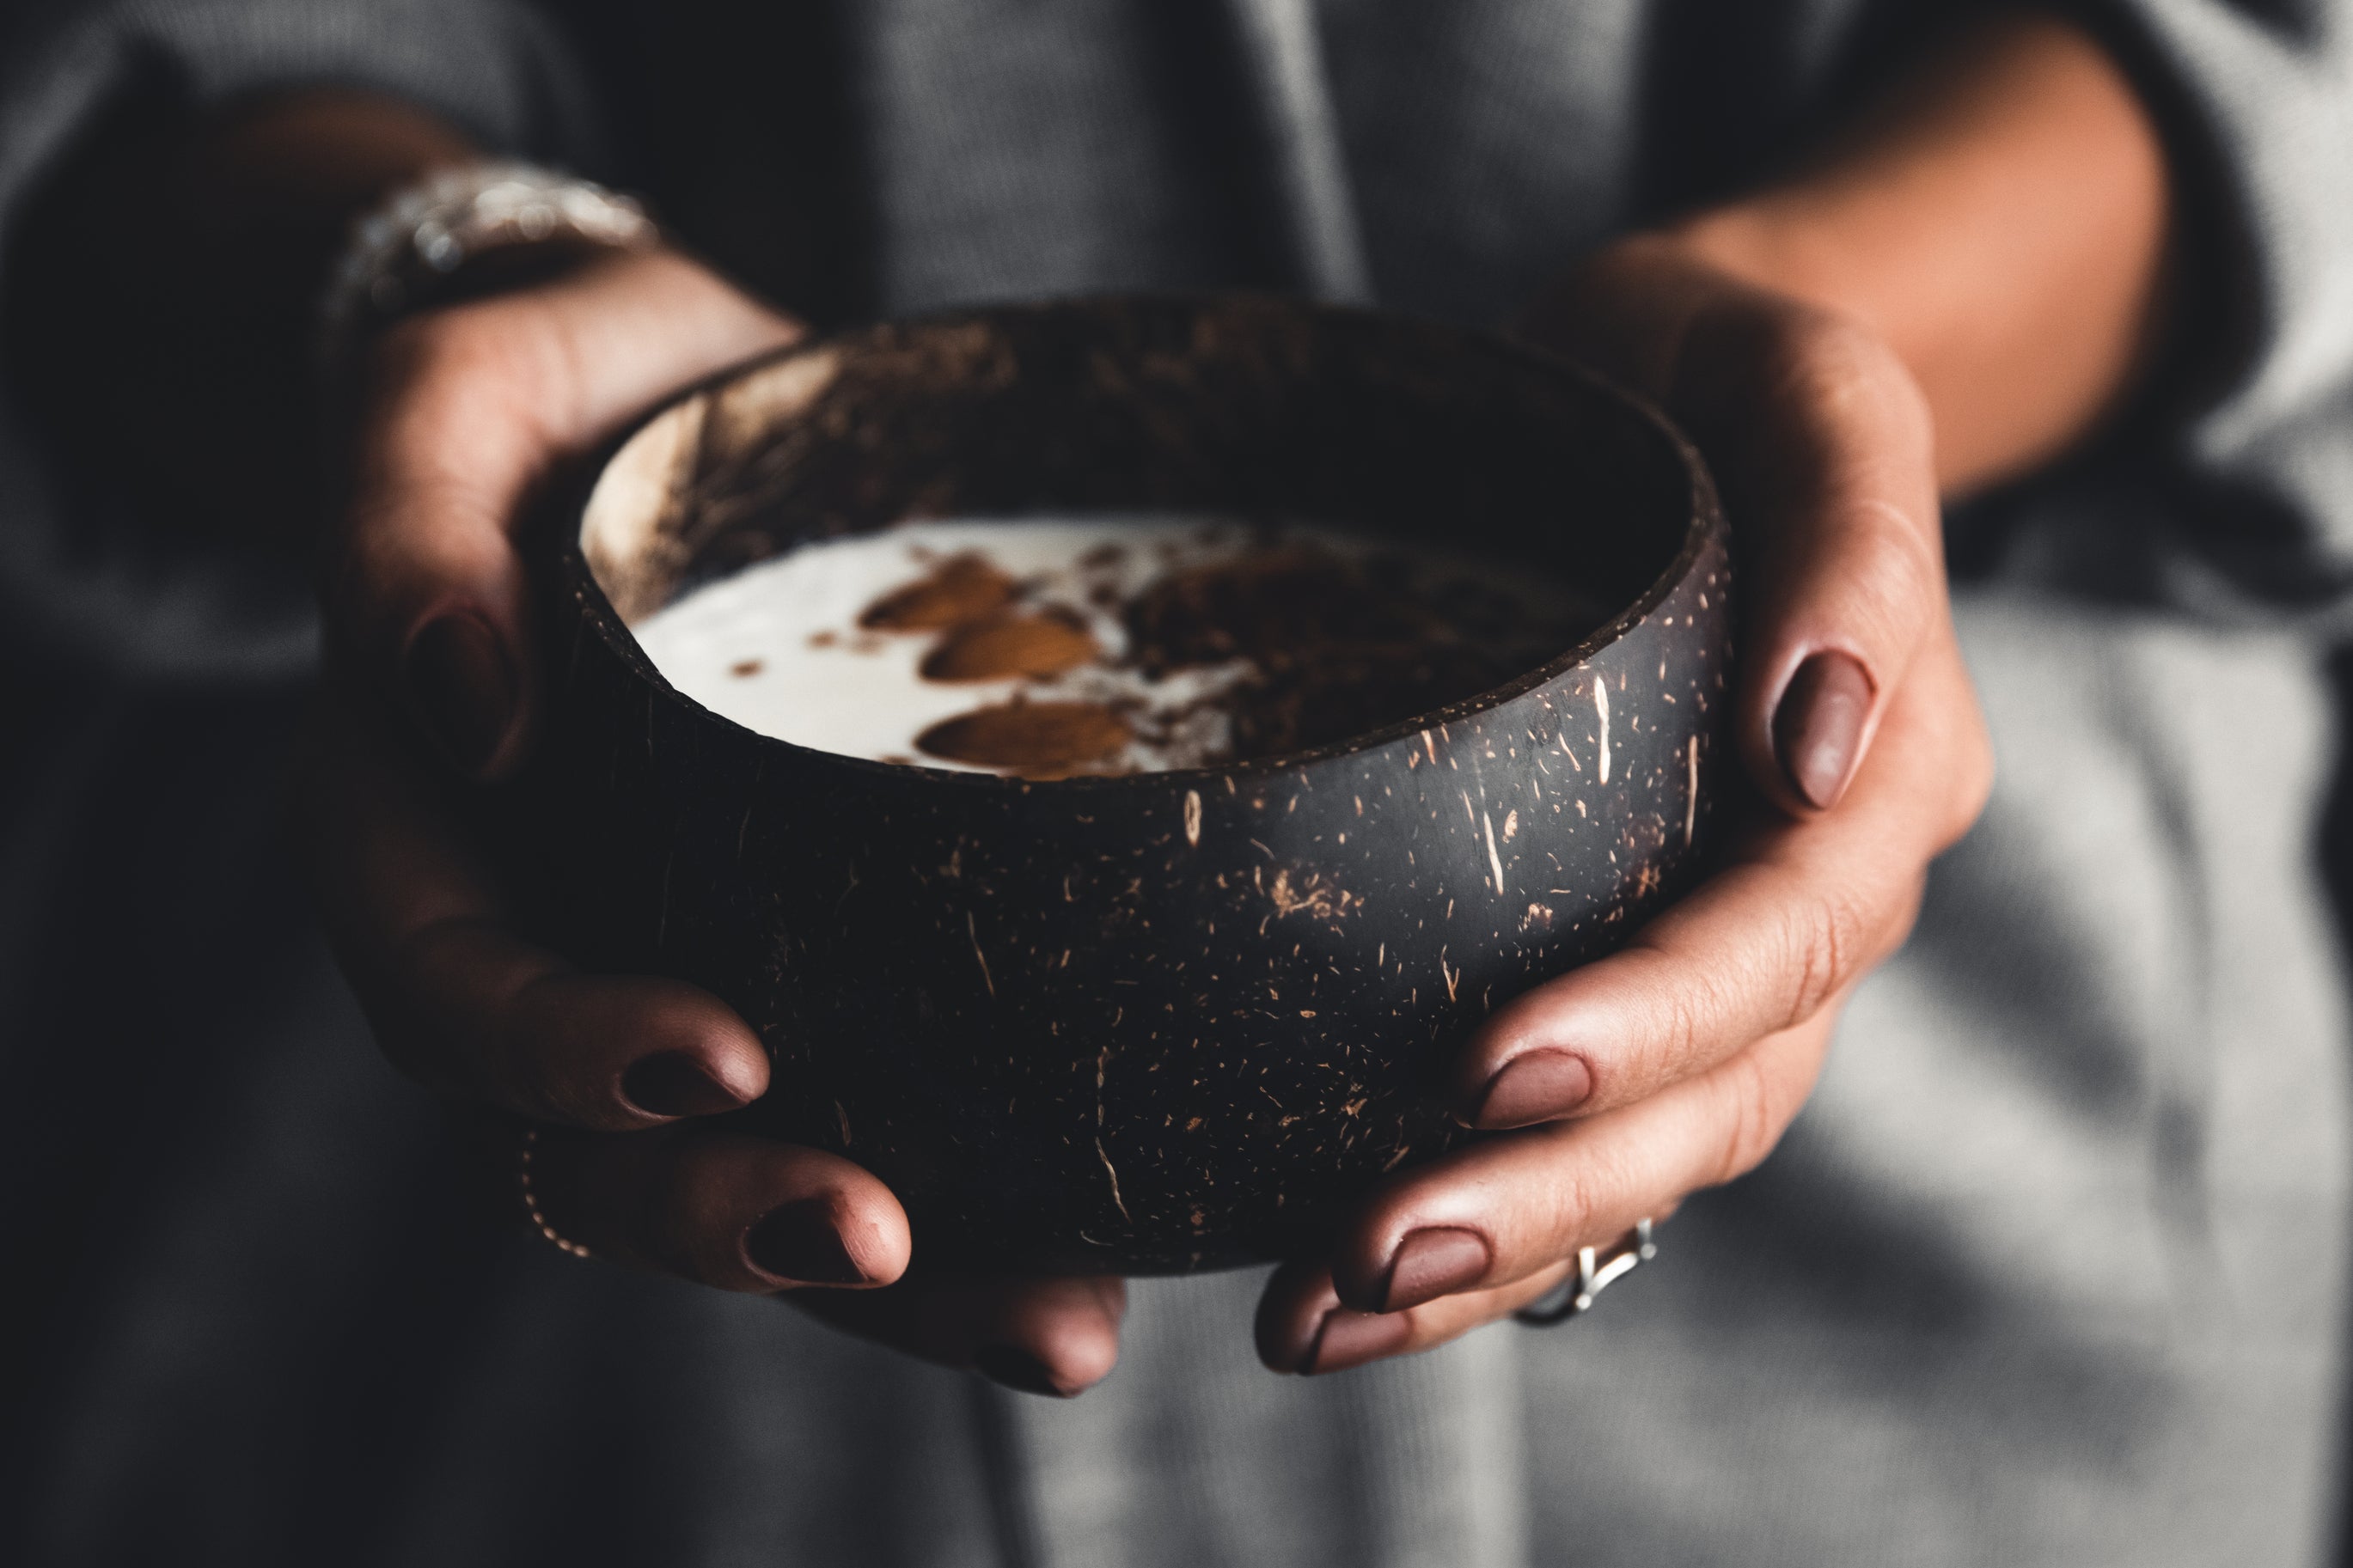 Coco Bowls makes the highest quality organic, all-natural, coconut bowls, wooden cutlery, bamboo straws, and other eco-accessories for smoothie bowls and more. We are constantly on the hunt for the best smoothie bowl recipes and eco-living inspiration! 